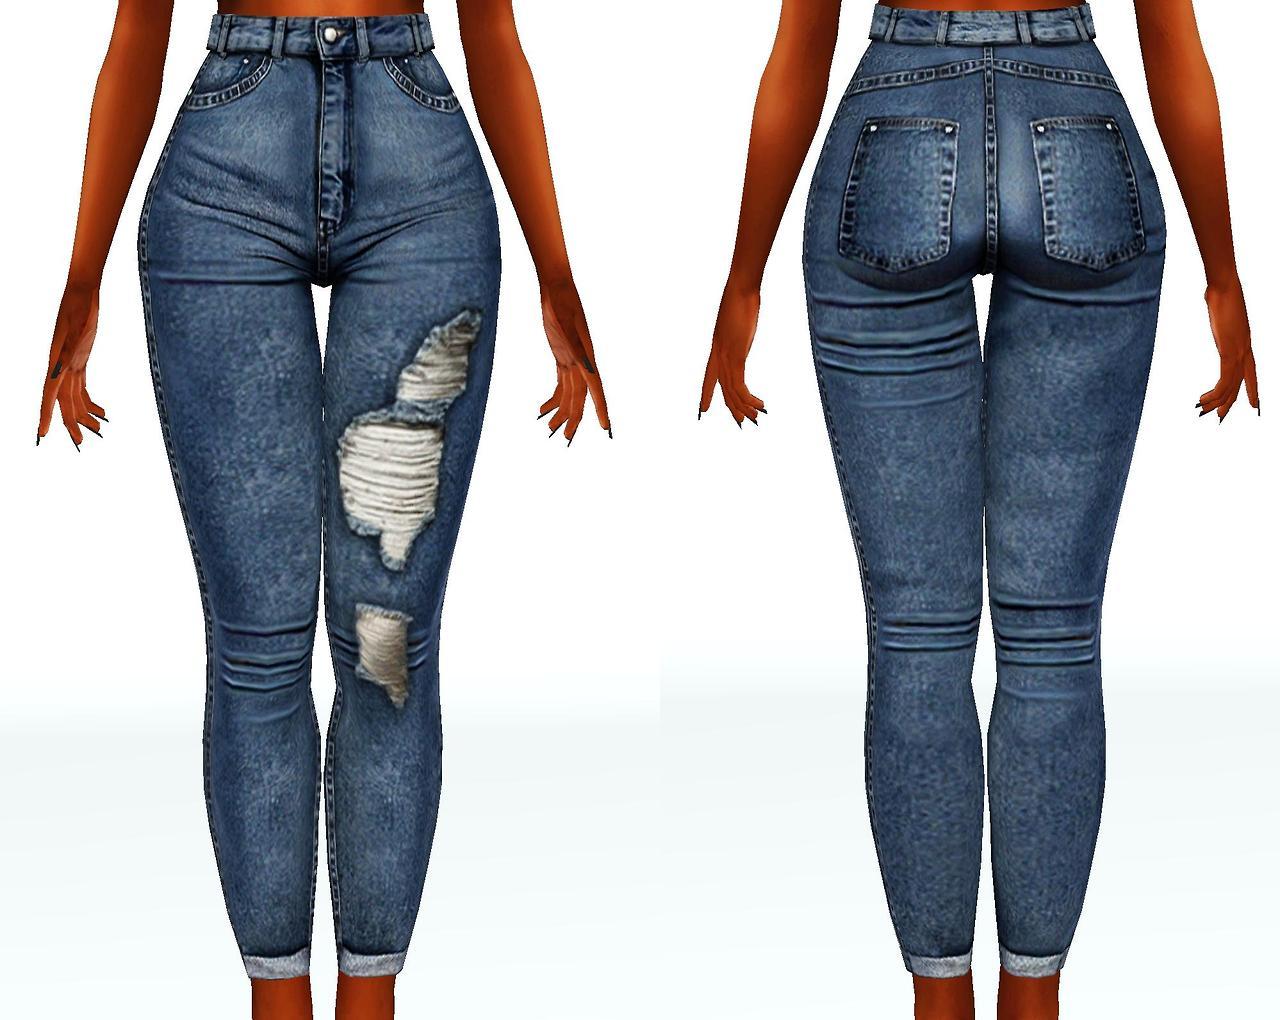 Savage Sims Cinch Skirt & Milf Skinnies Converted To Sims 3• All credit goes to @savage-sims• These may not go well with longer tops• They have morphs• I included 45 designs split into two files for the skirt• I included 25 designs split into...